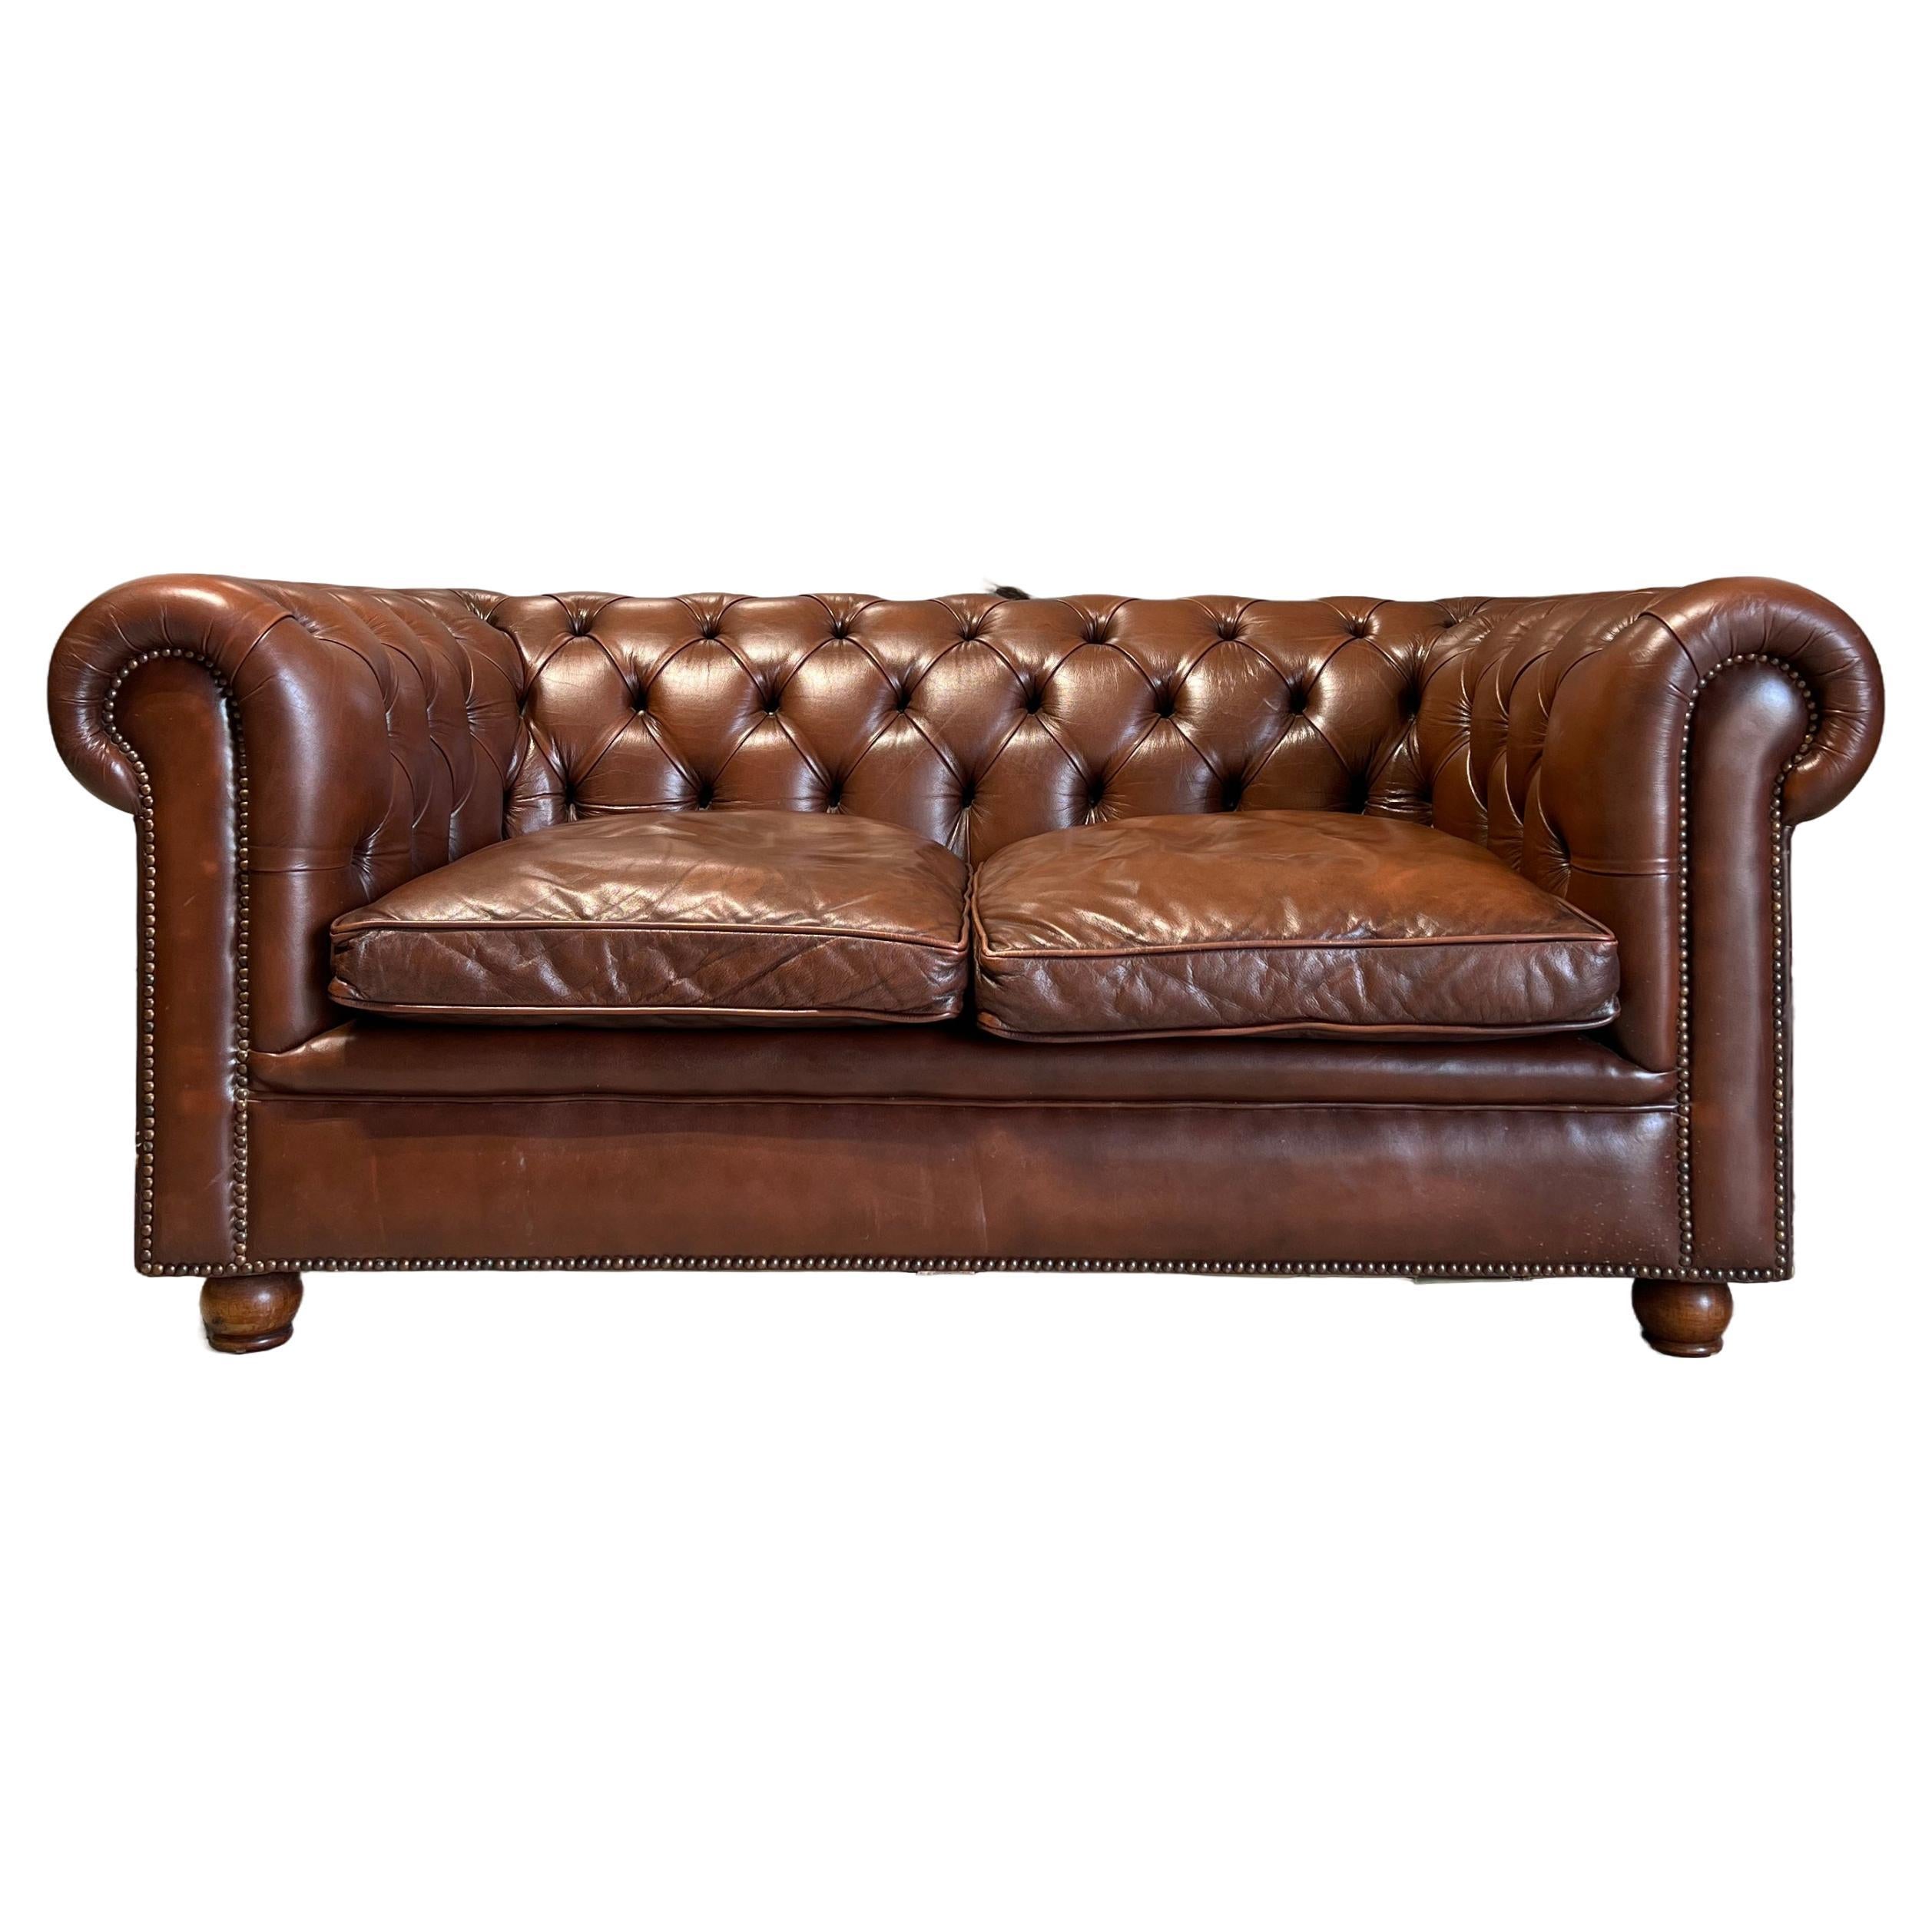 1 of a Pair - A Very Smart Mid-Late 20thC Leather Chesterfield Sofa 